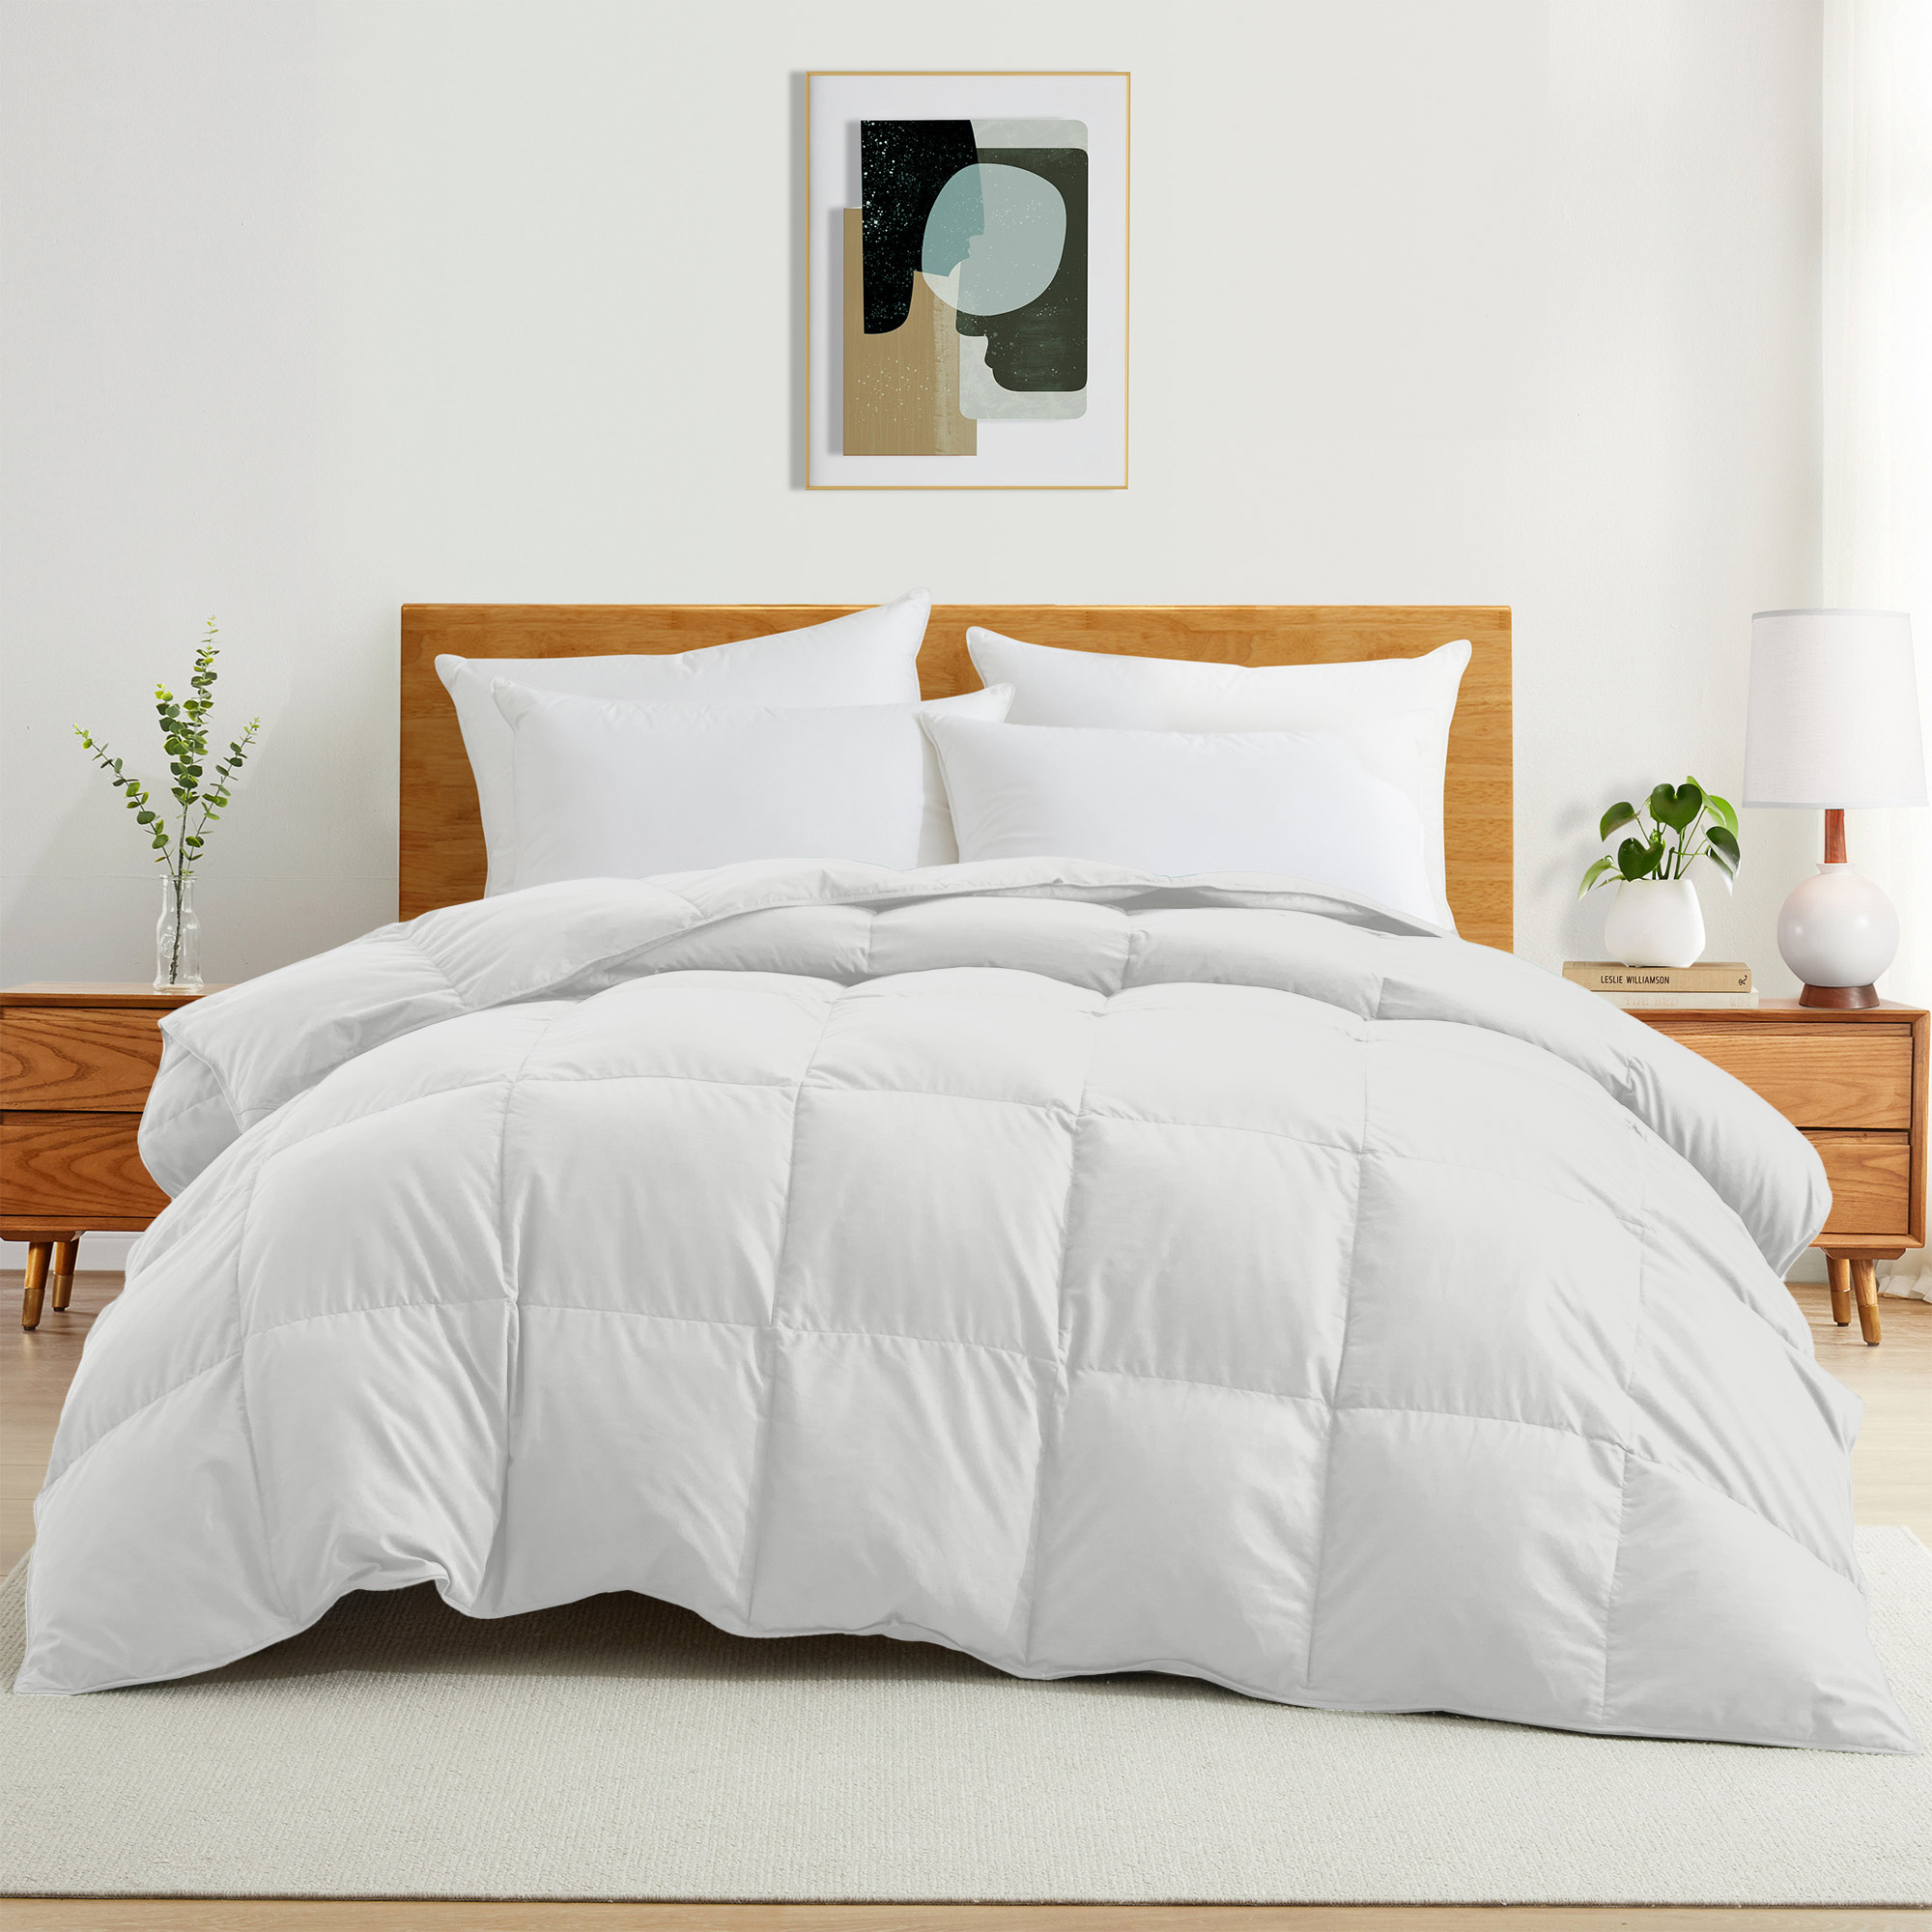 All Seasons Goose Down Feather Comforter Ultra Soft Comforter With Peach Skin Fabric - White, Twin-68*88